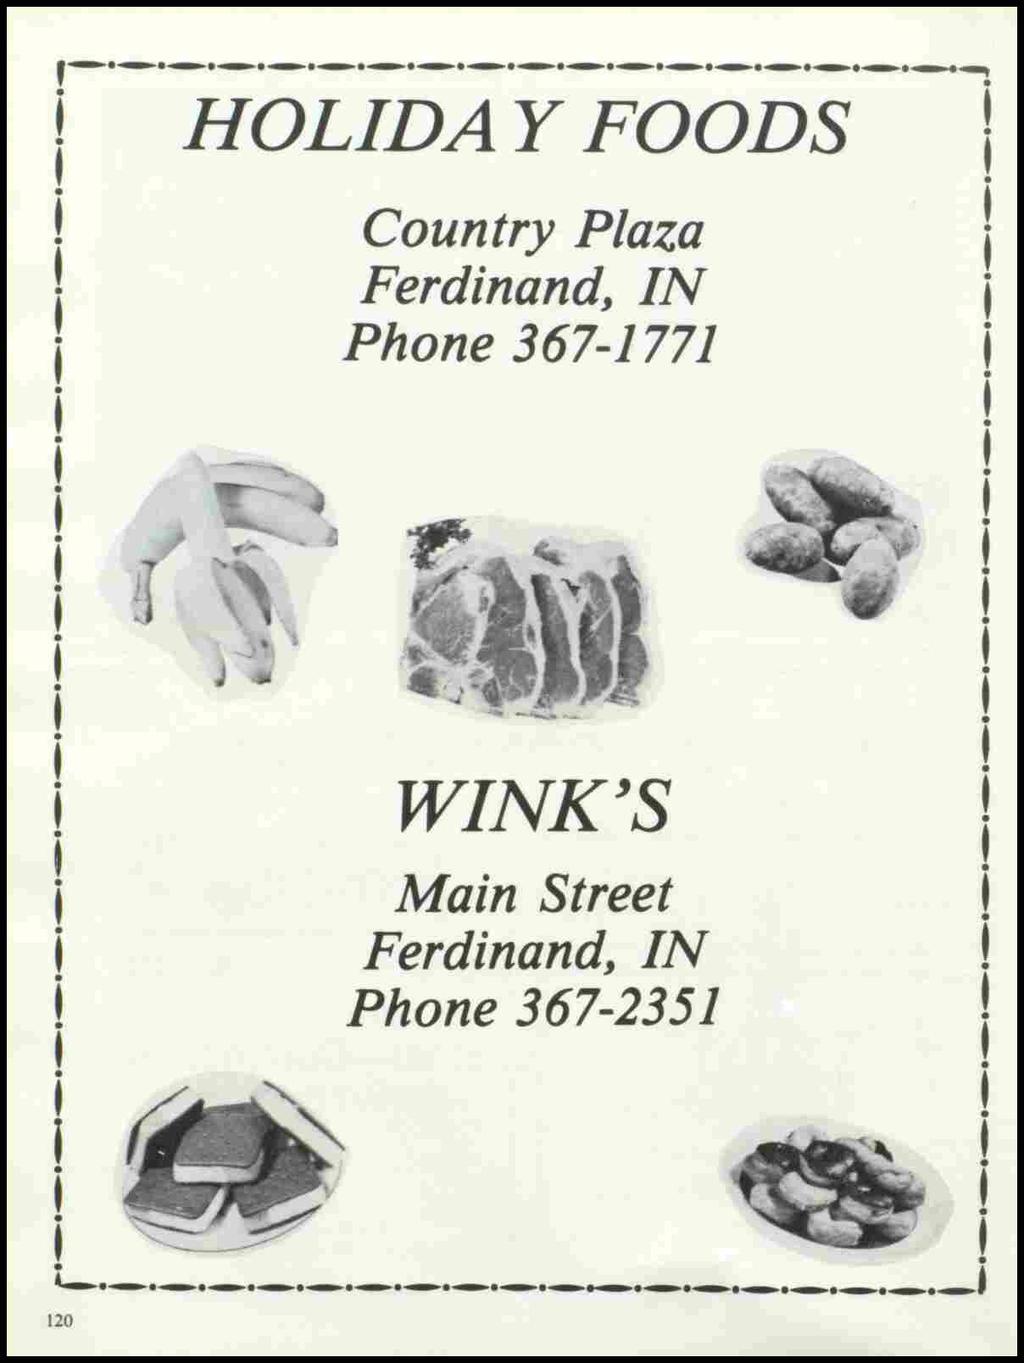 Country Plaza Ferdinand, IN Phone 367-1771 t i i.